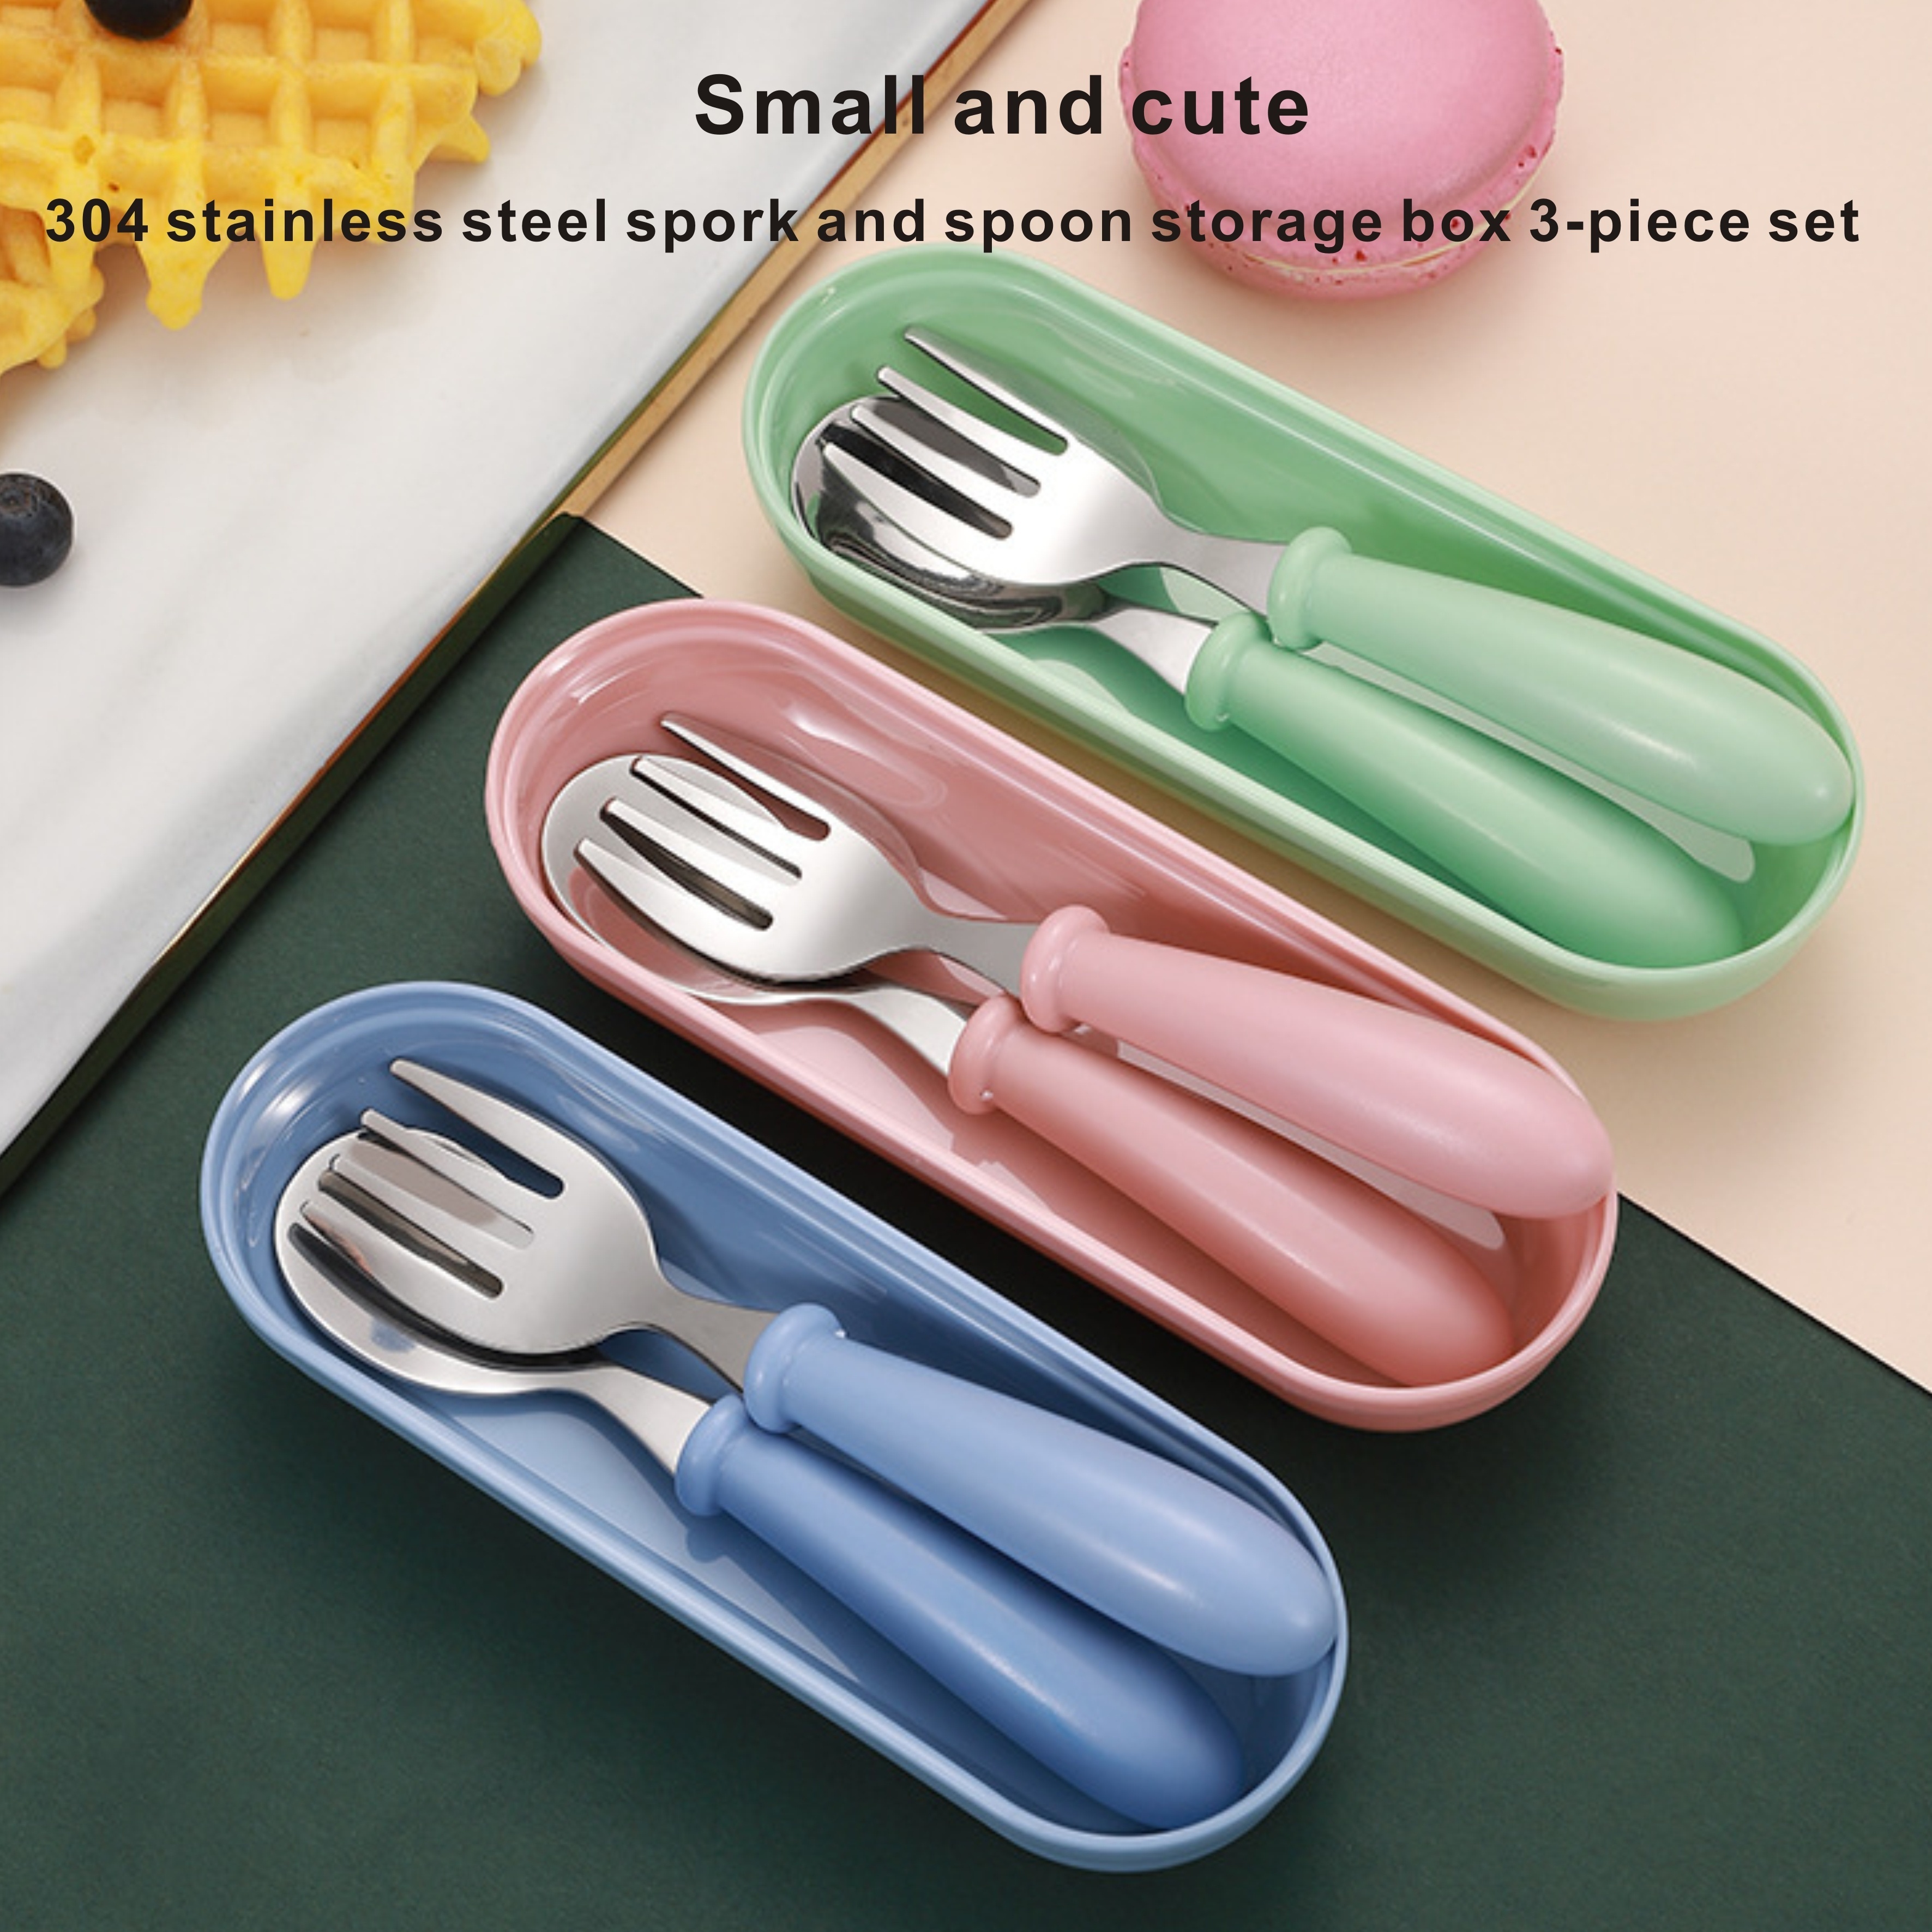 

Charming 3-piece Cutlery Set For Young Youngsters - Includes Fork, Spoon & Storage Box